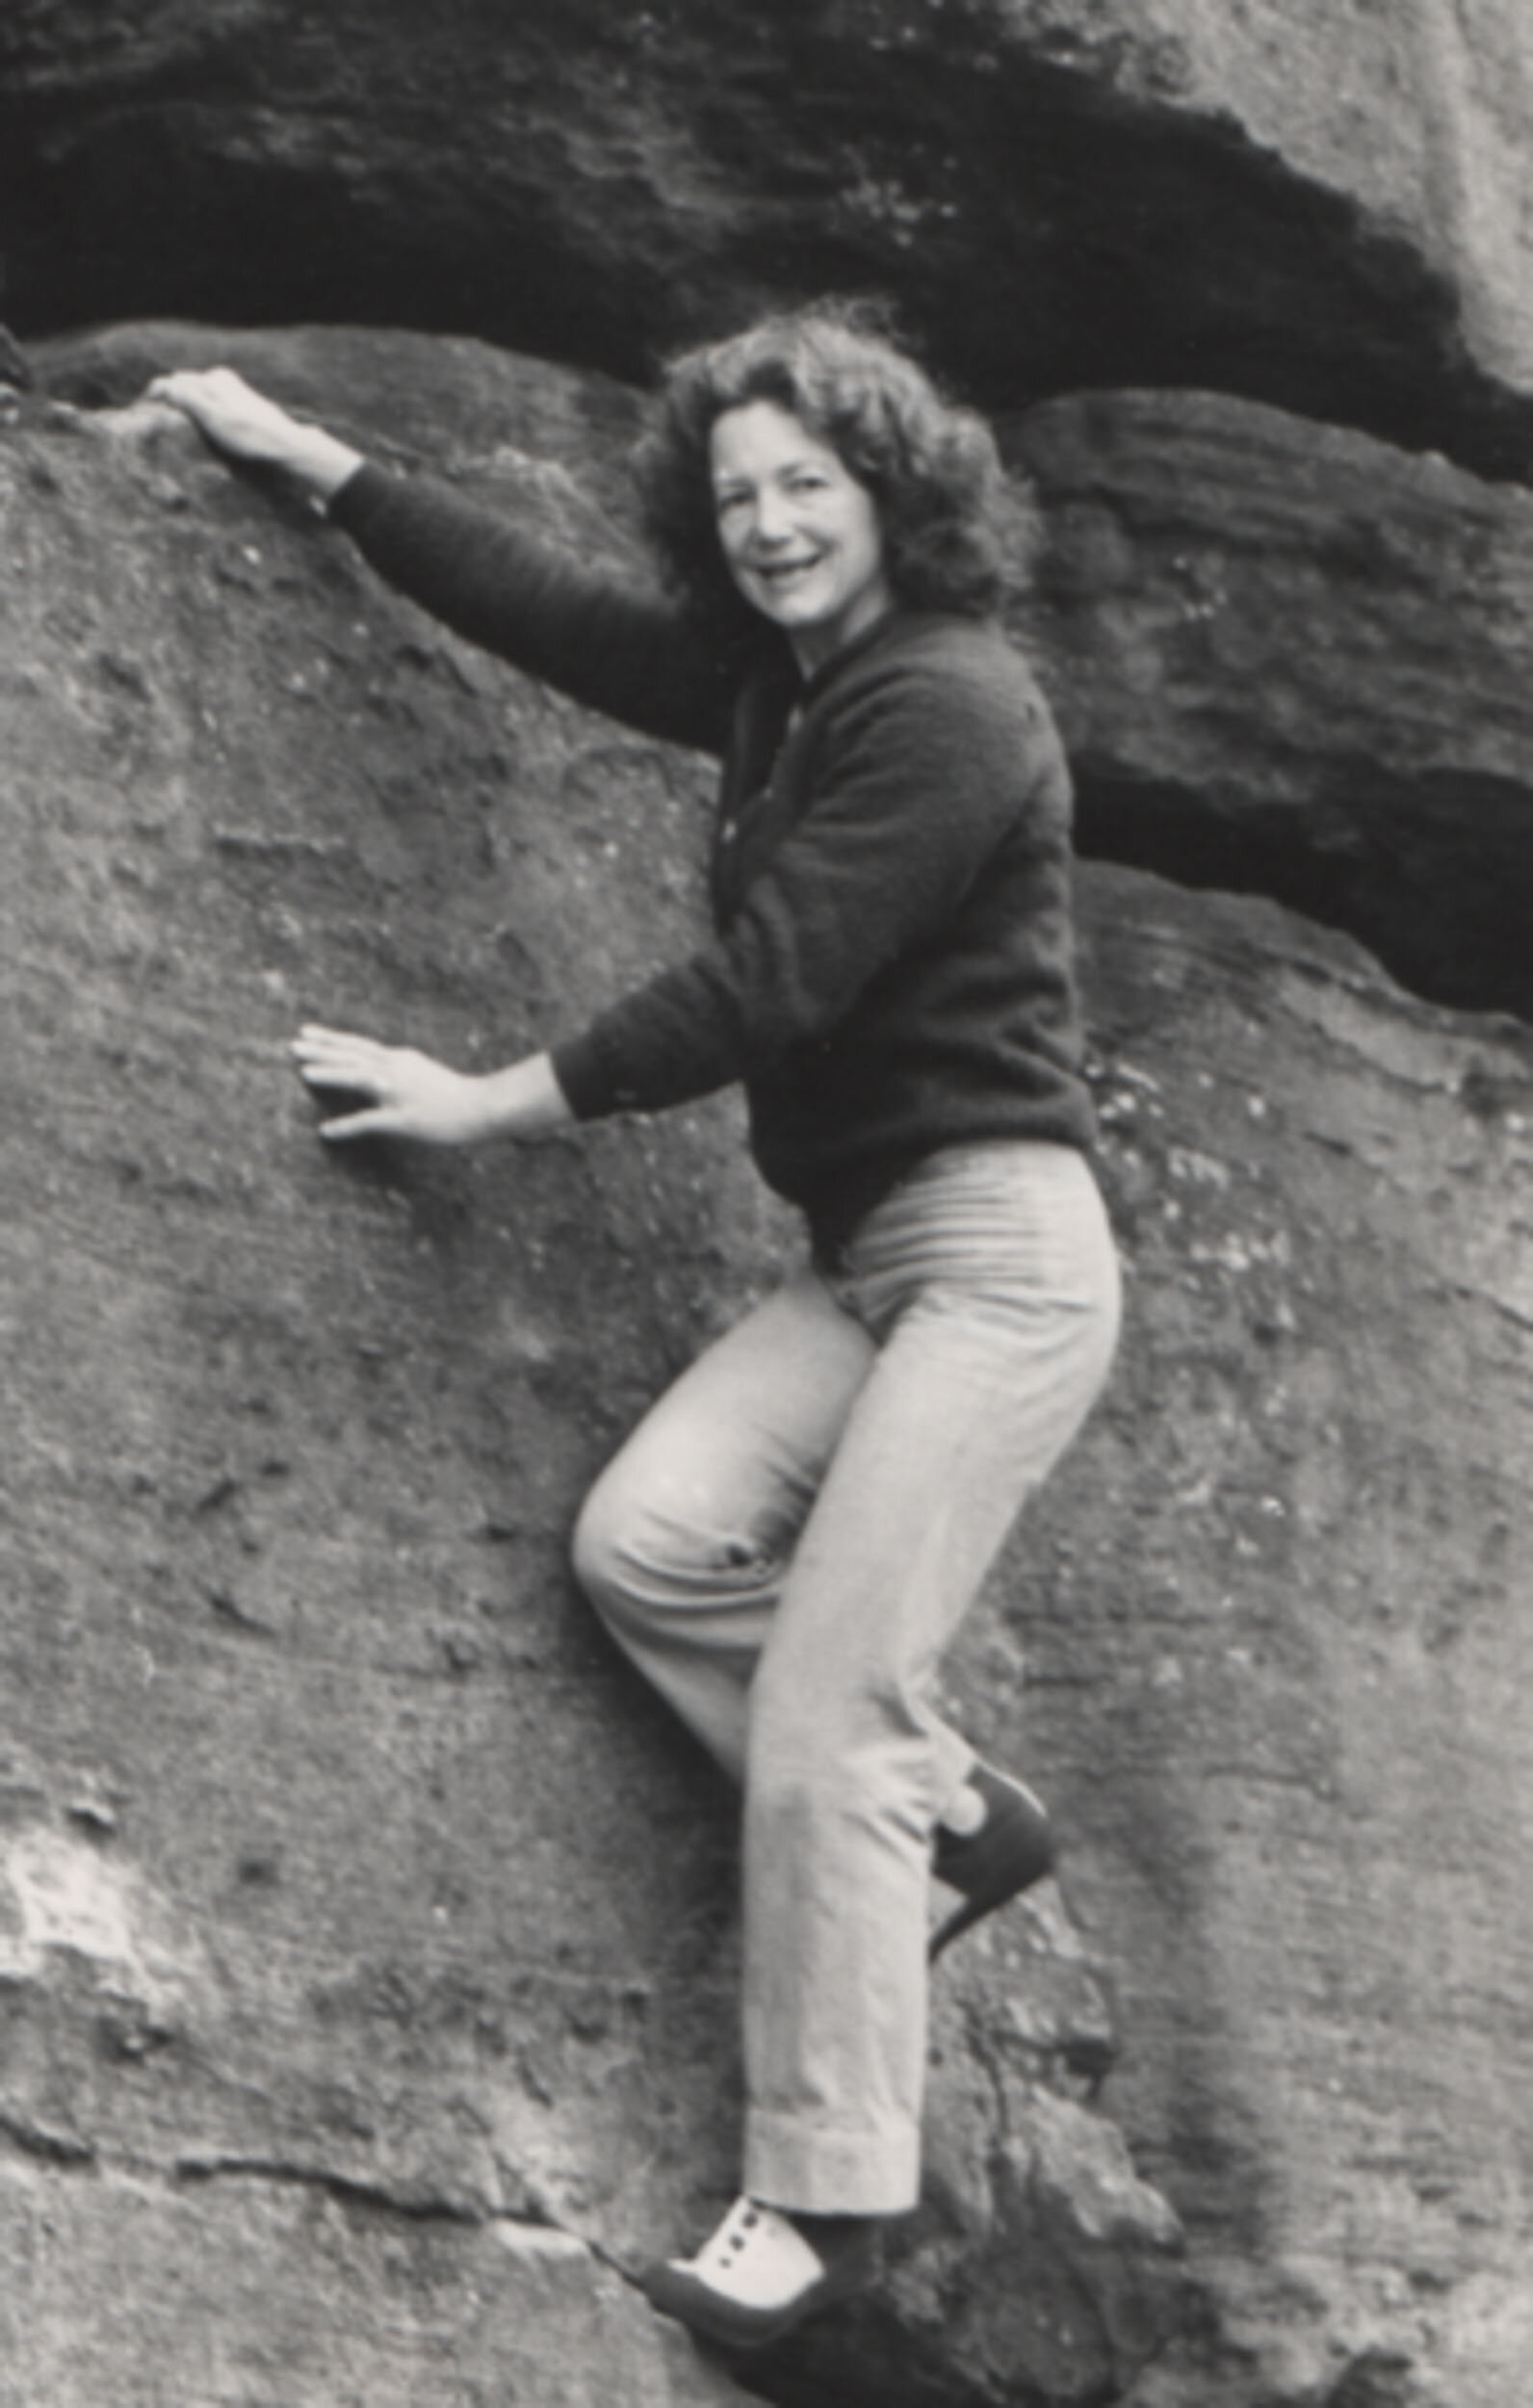 Angela Soper soloing at Almscliffe, Yorkshire, in 1981 